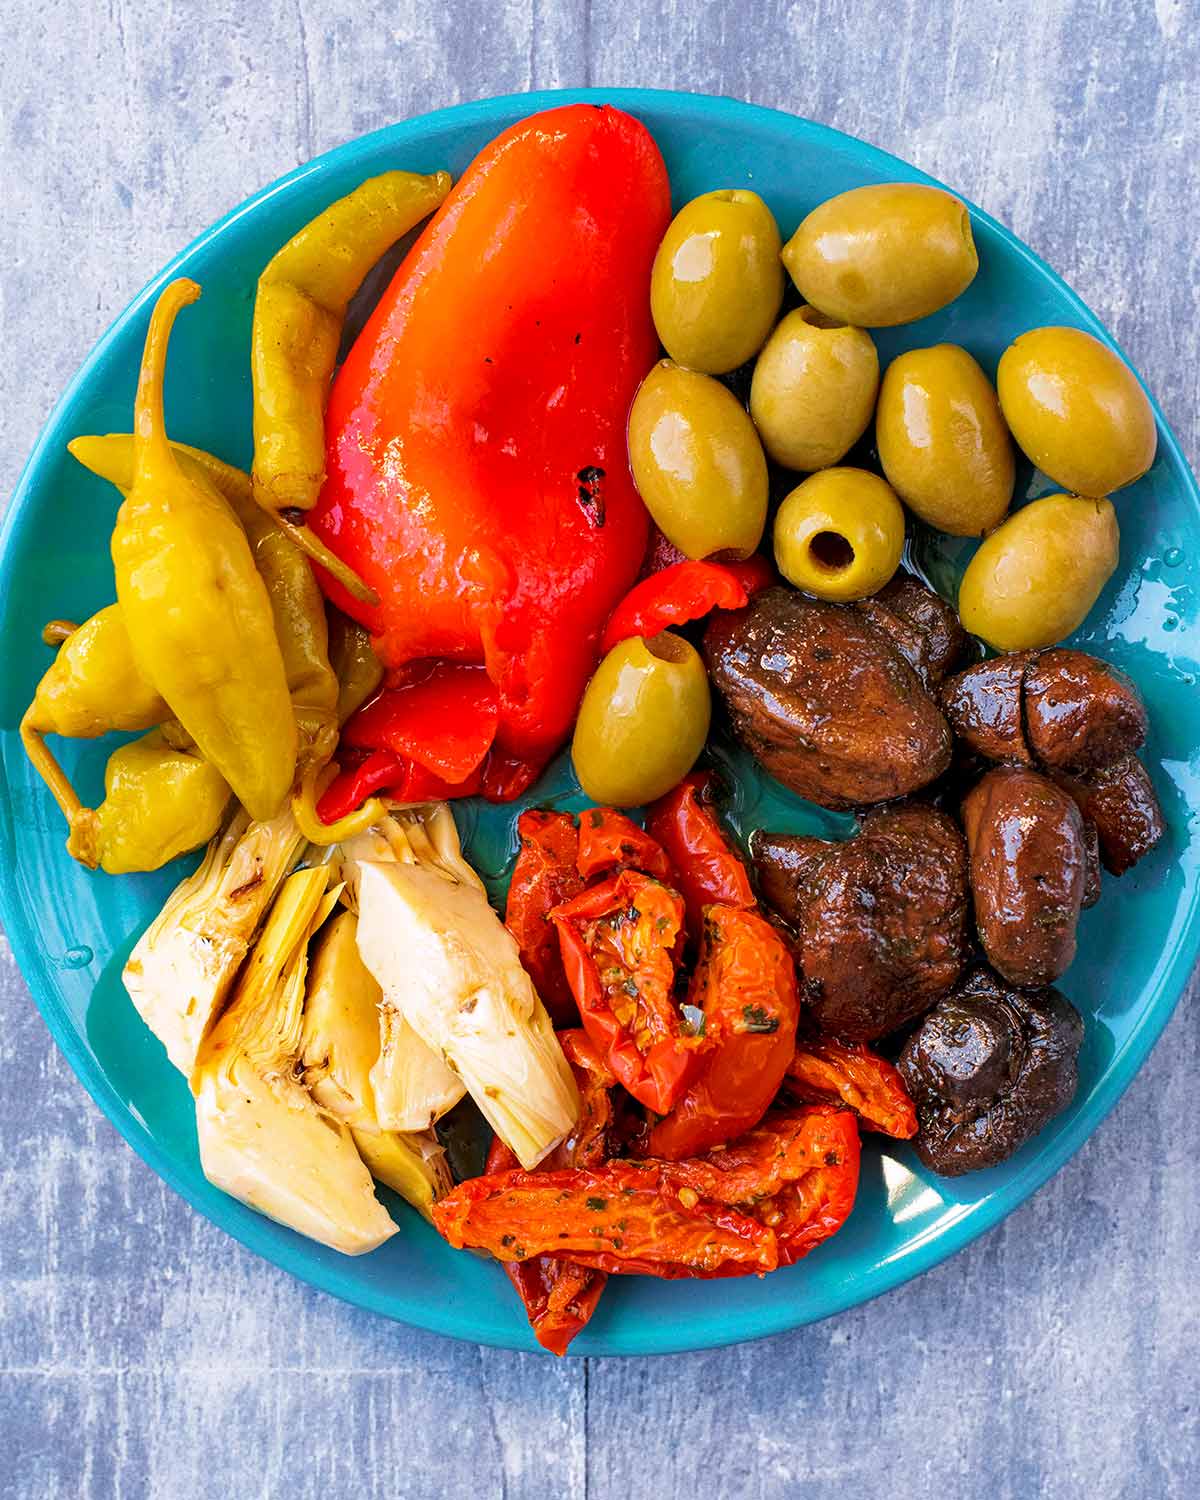 Olives, peppers, mushrooms, artichokes and chillis arranged on a blue plate.